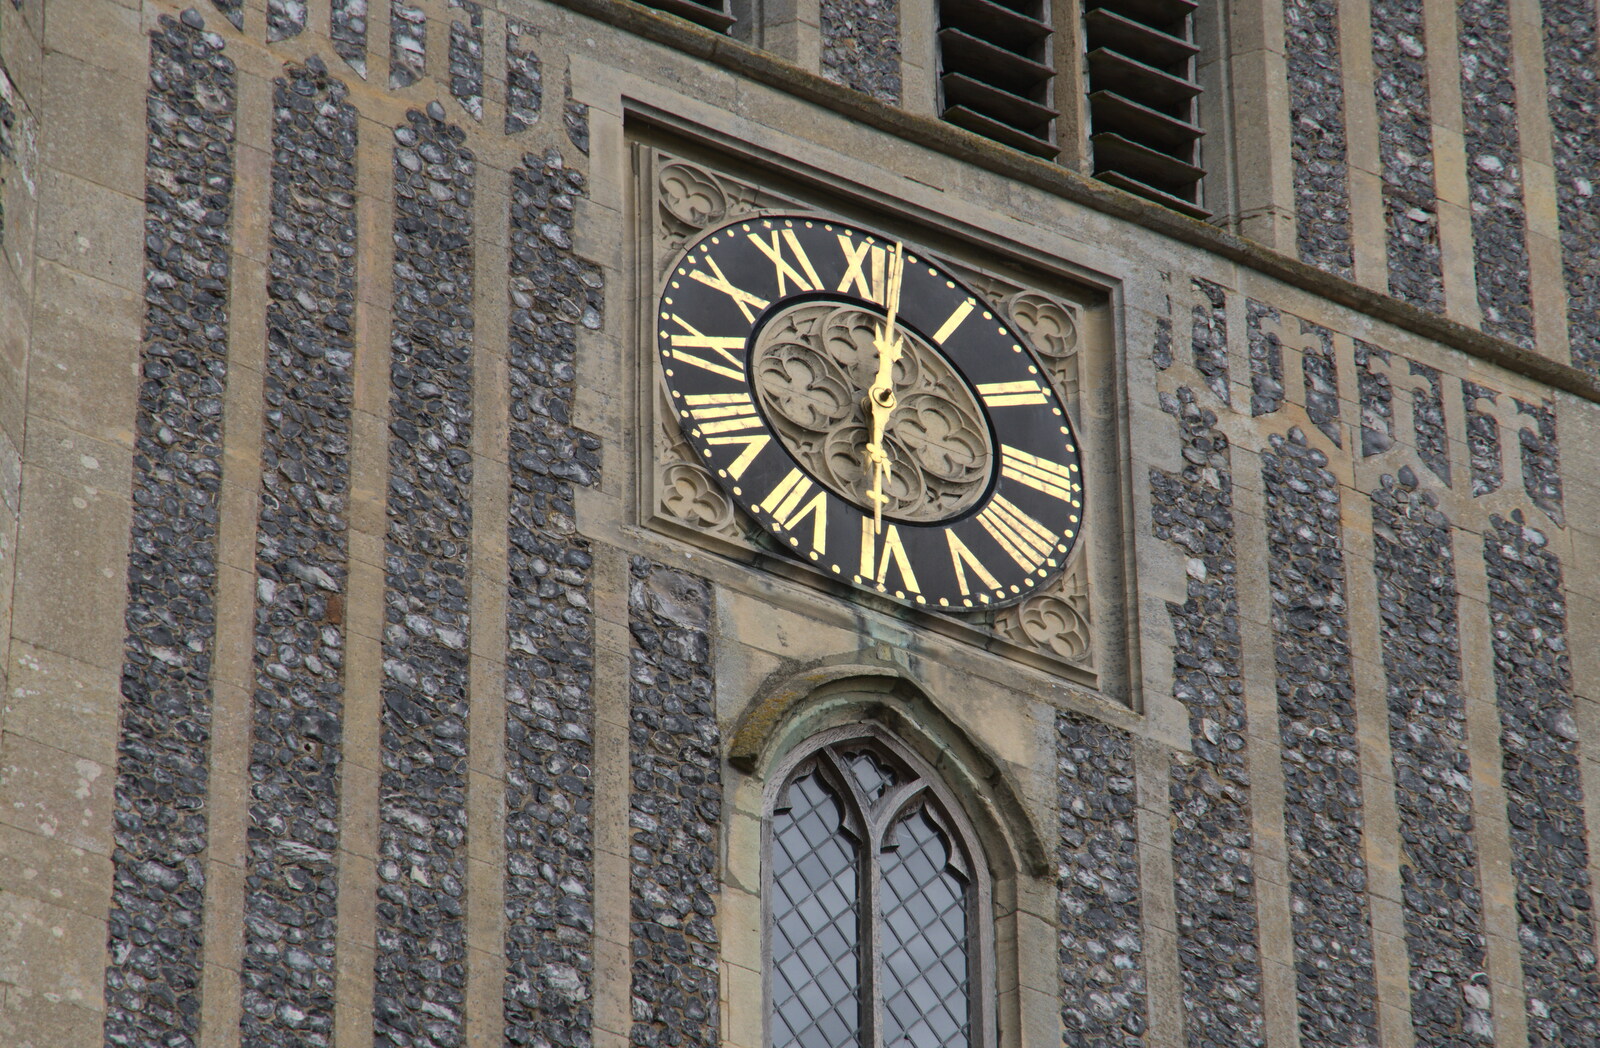 The church clock from A Picnic at Clive and Suzanne's, Braisworth, Suffolk - 11th July 2020